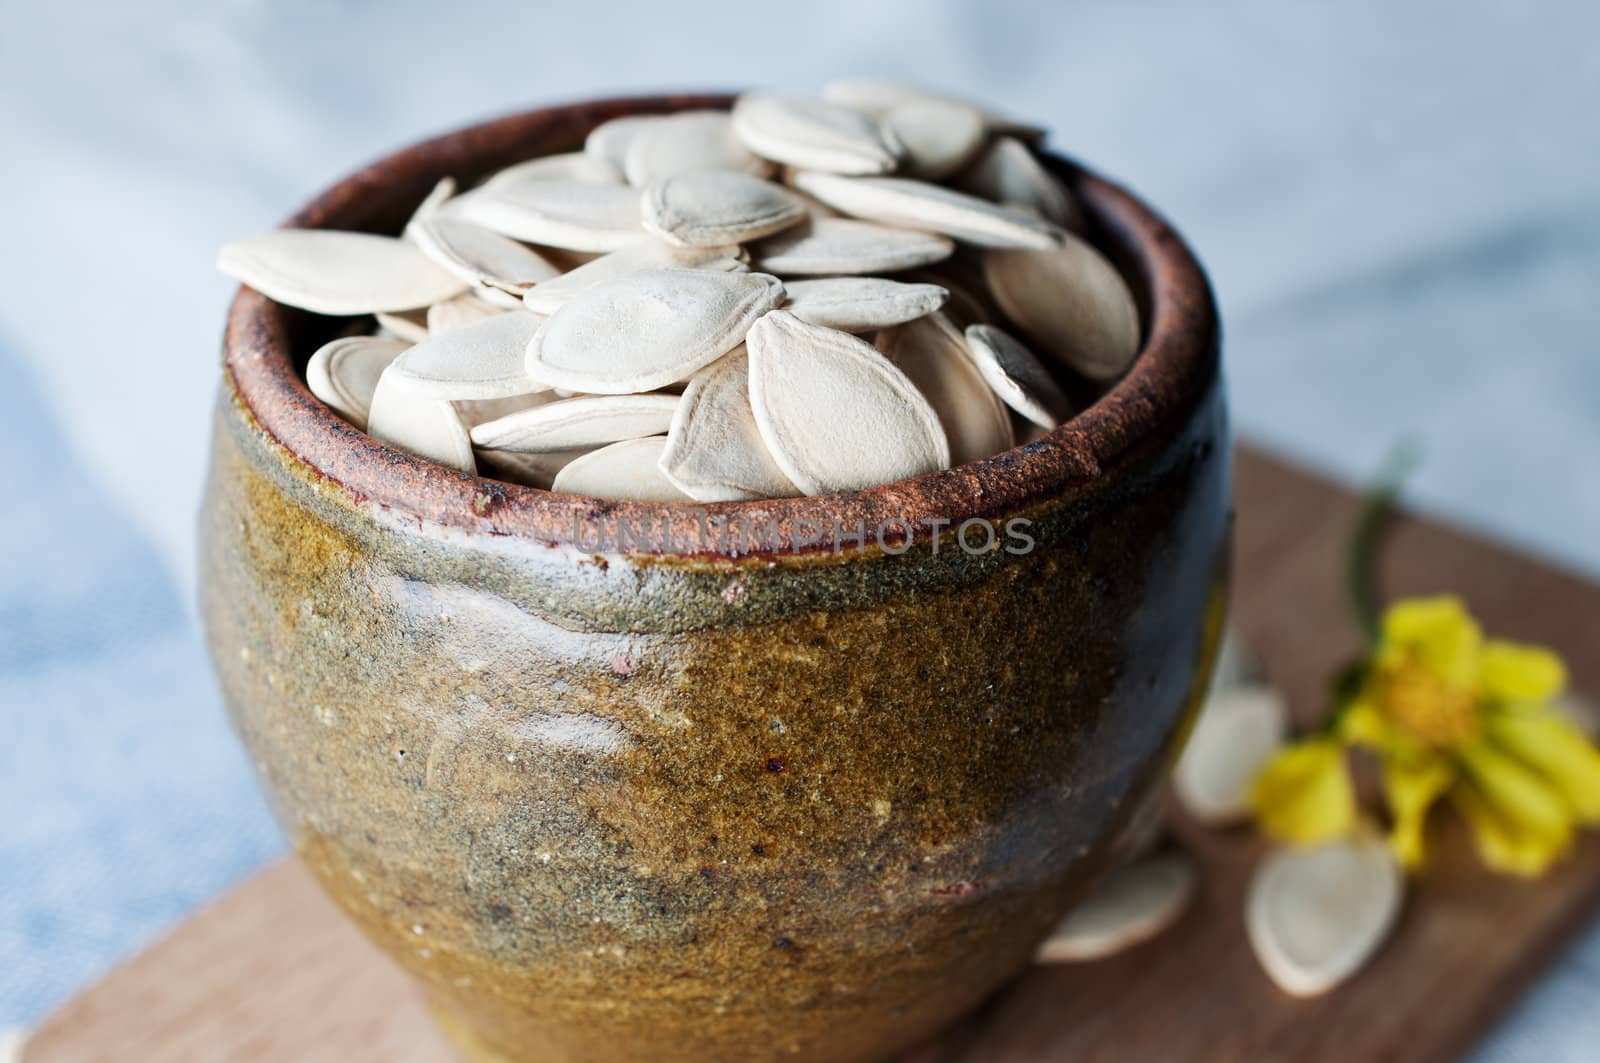 Ceramic bowl full of pumpkin seeds on kitchen table background